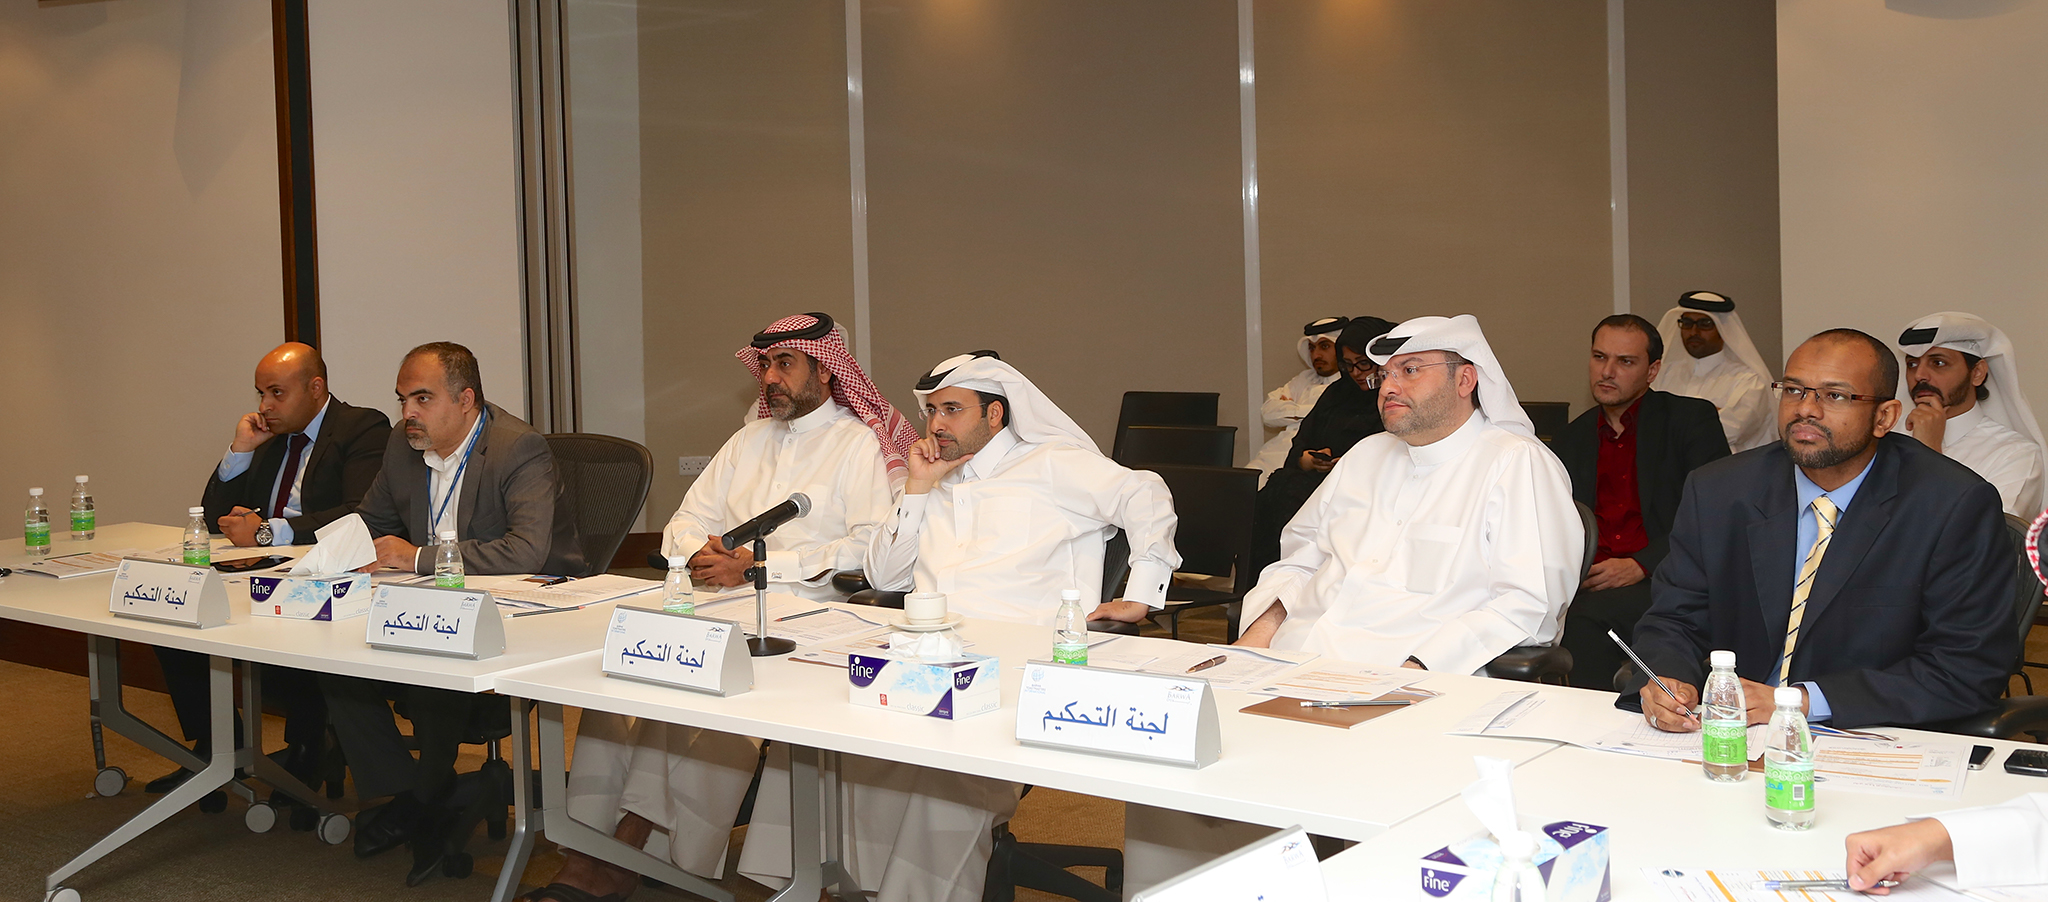 The Annual Competition of Barwa Toastmasters International